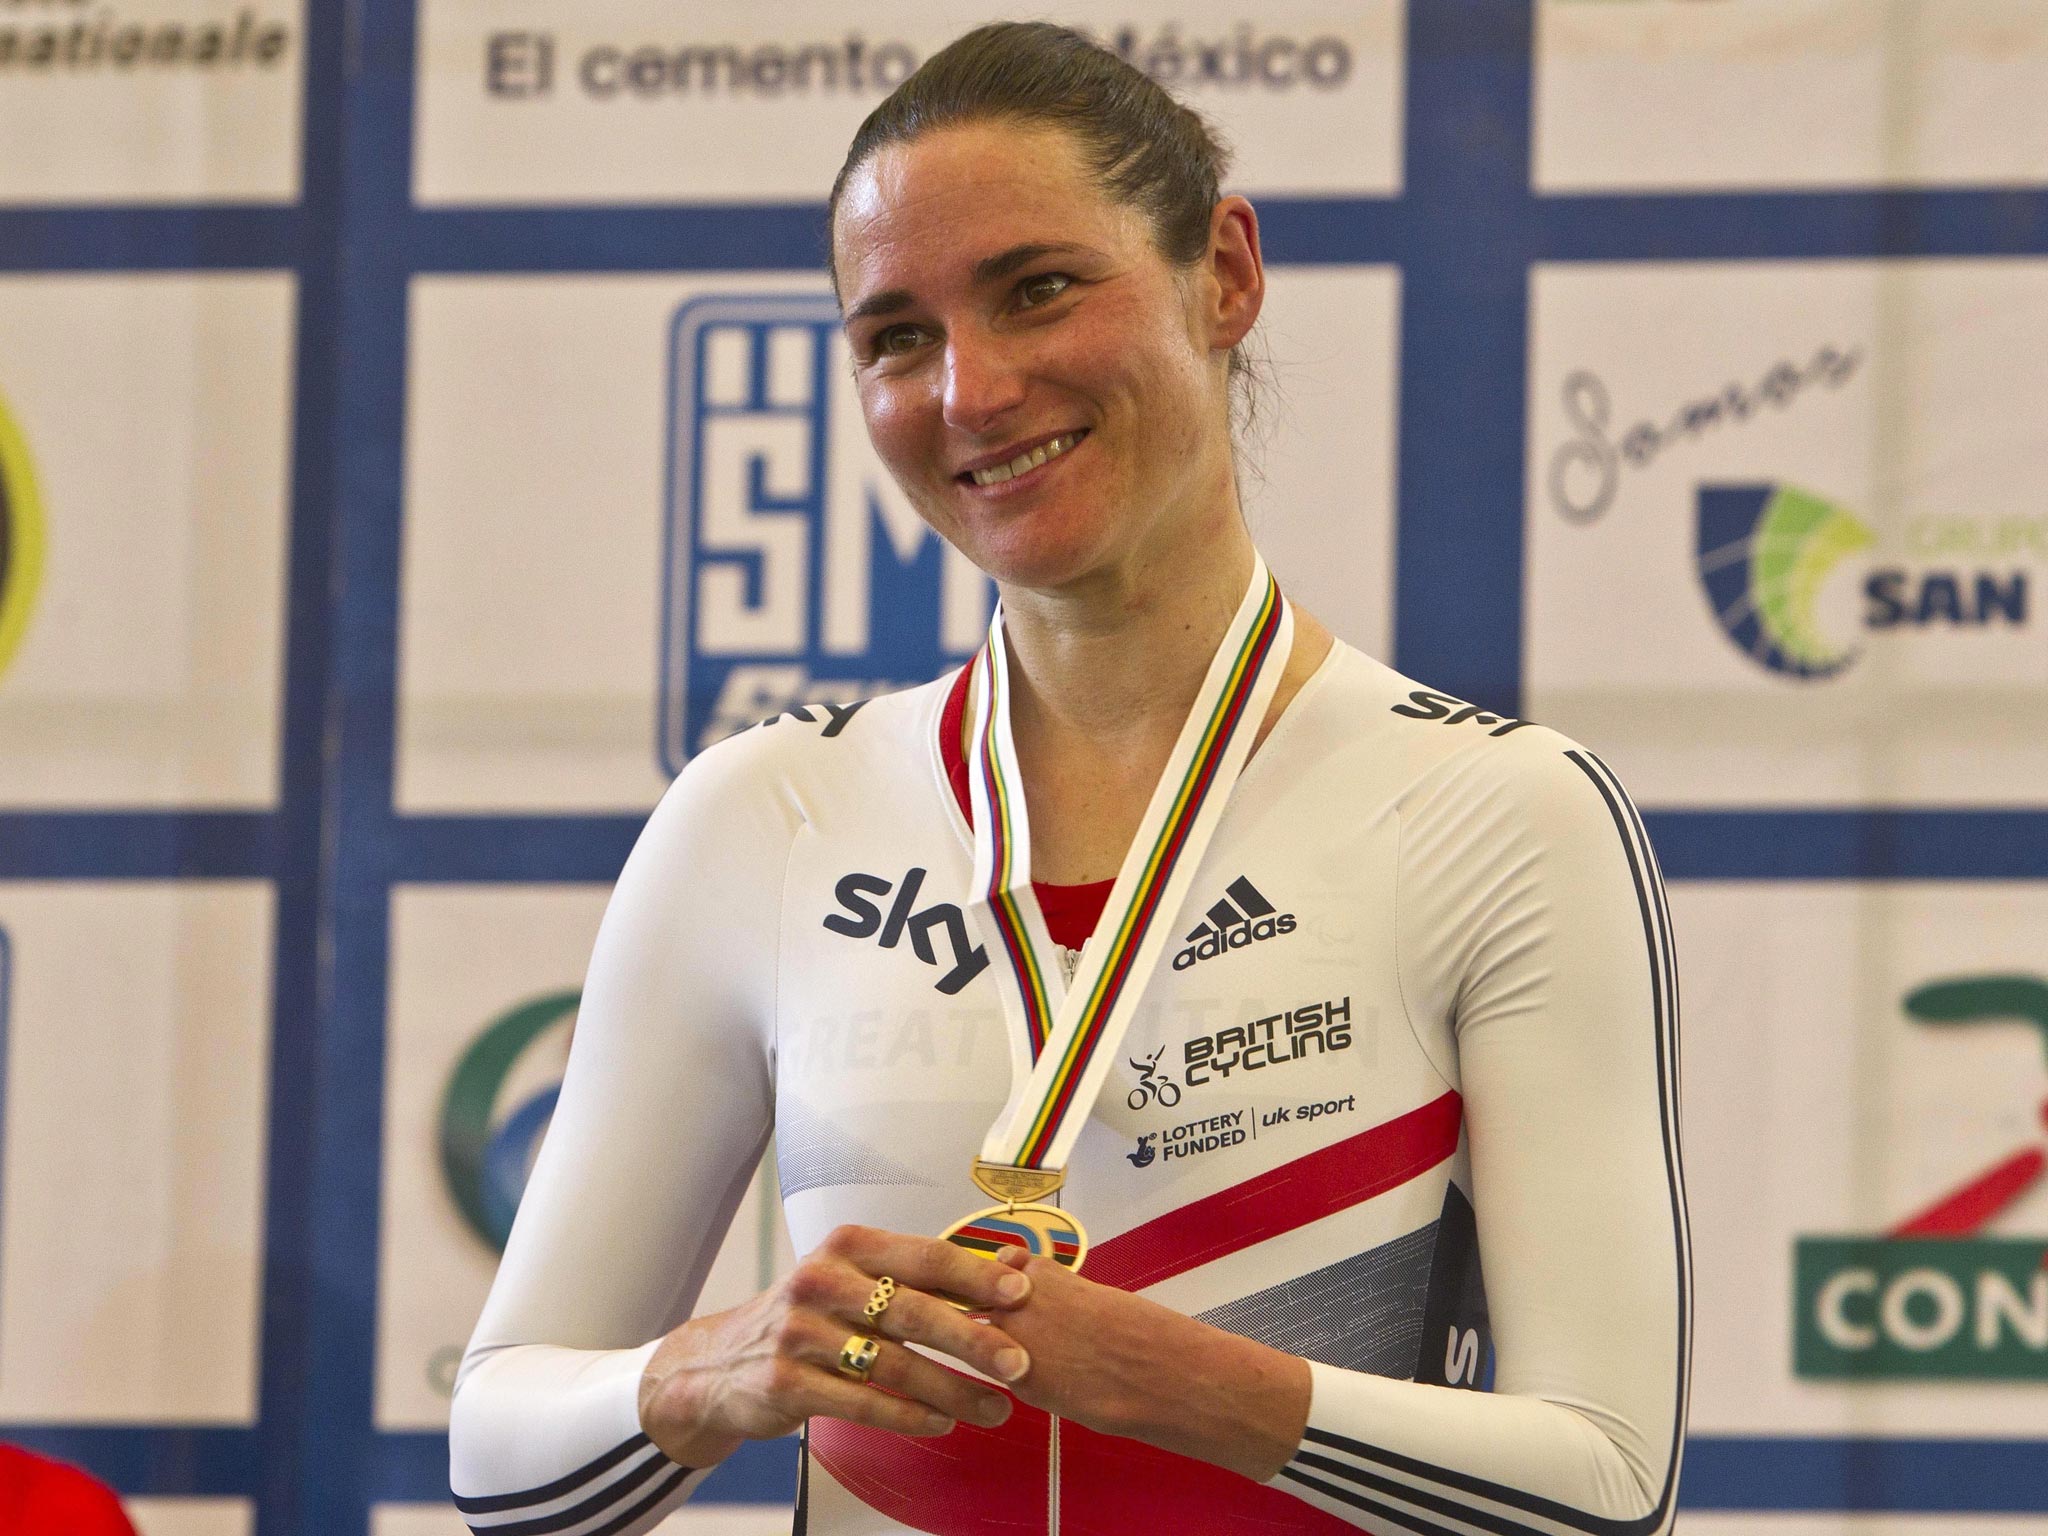 Sarah Storey won Great Britain’s first medal of the 2014 World Paracycling Track Championships